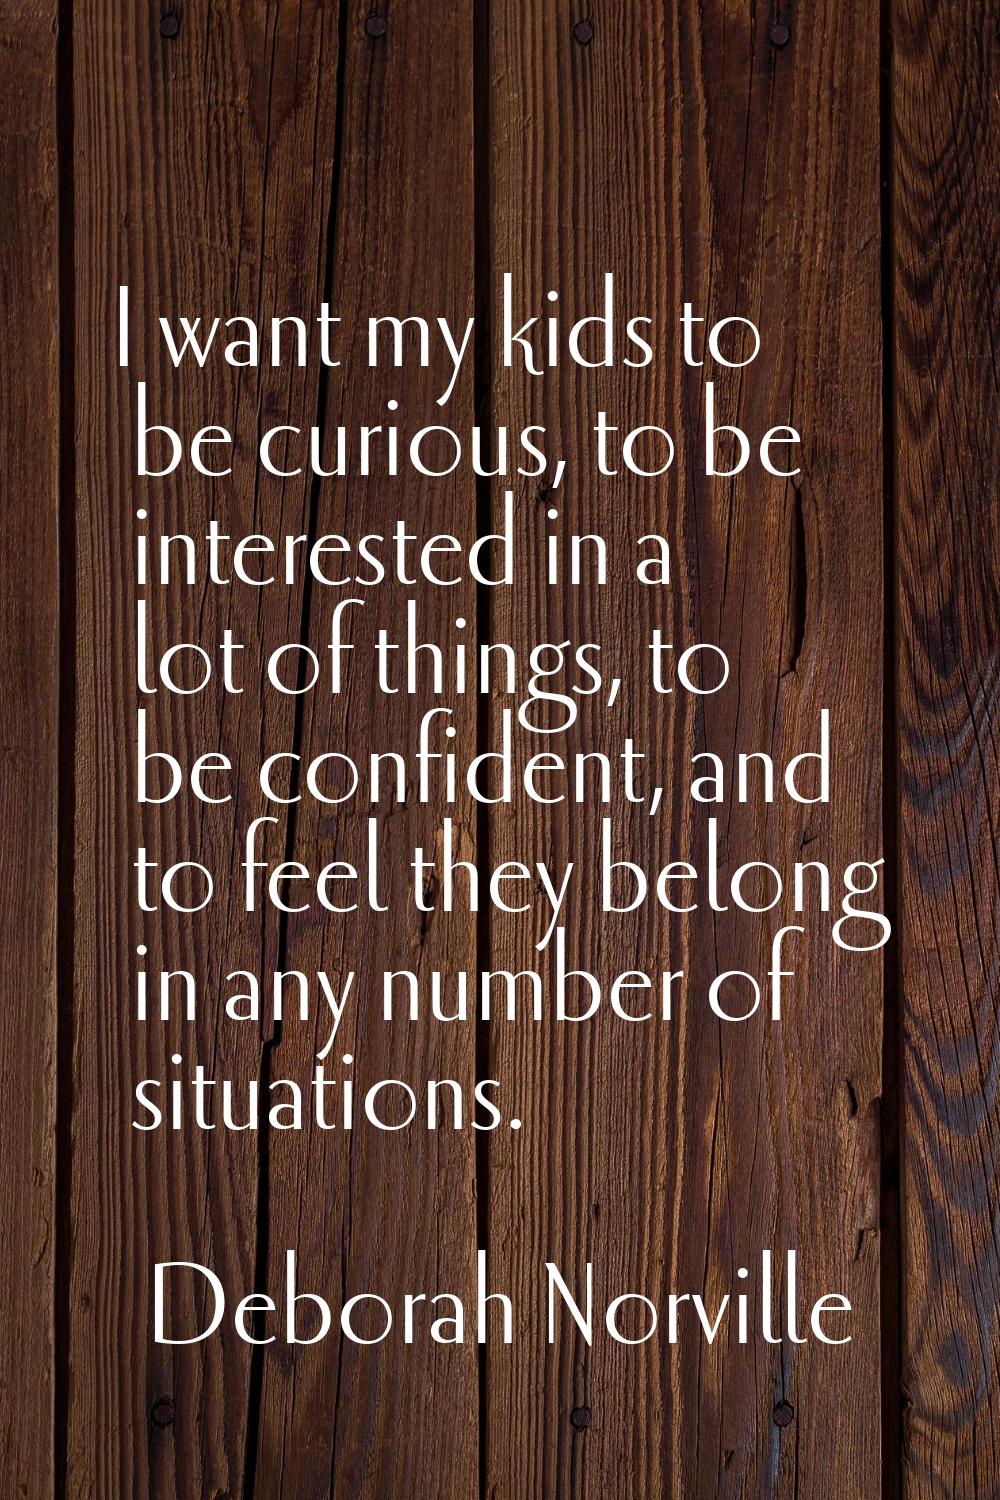 I want my kids to be curious, to be interested in a lot of things, to be confident, and to feel the